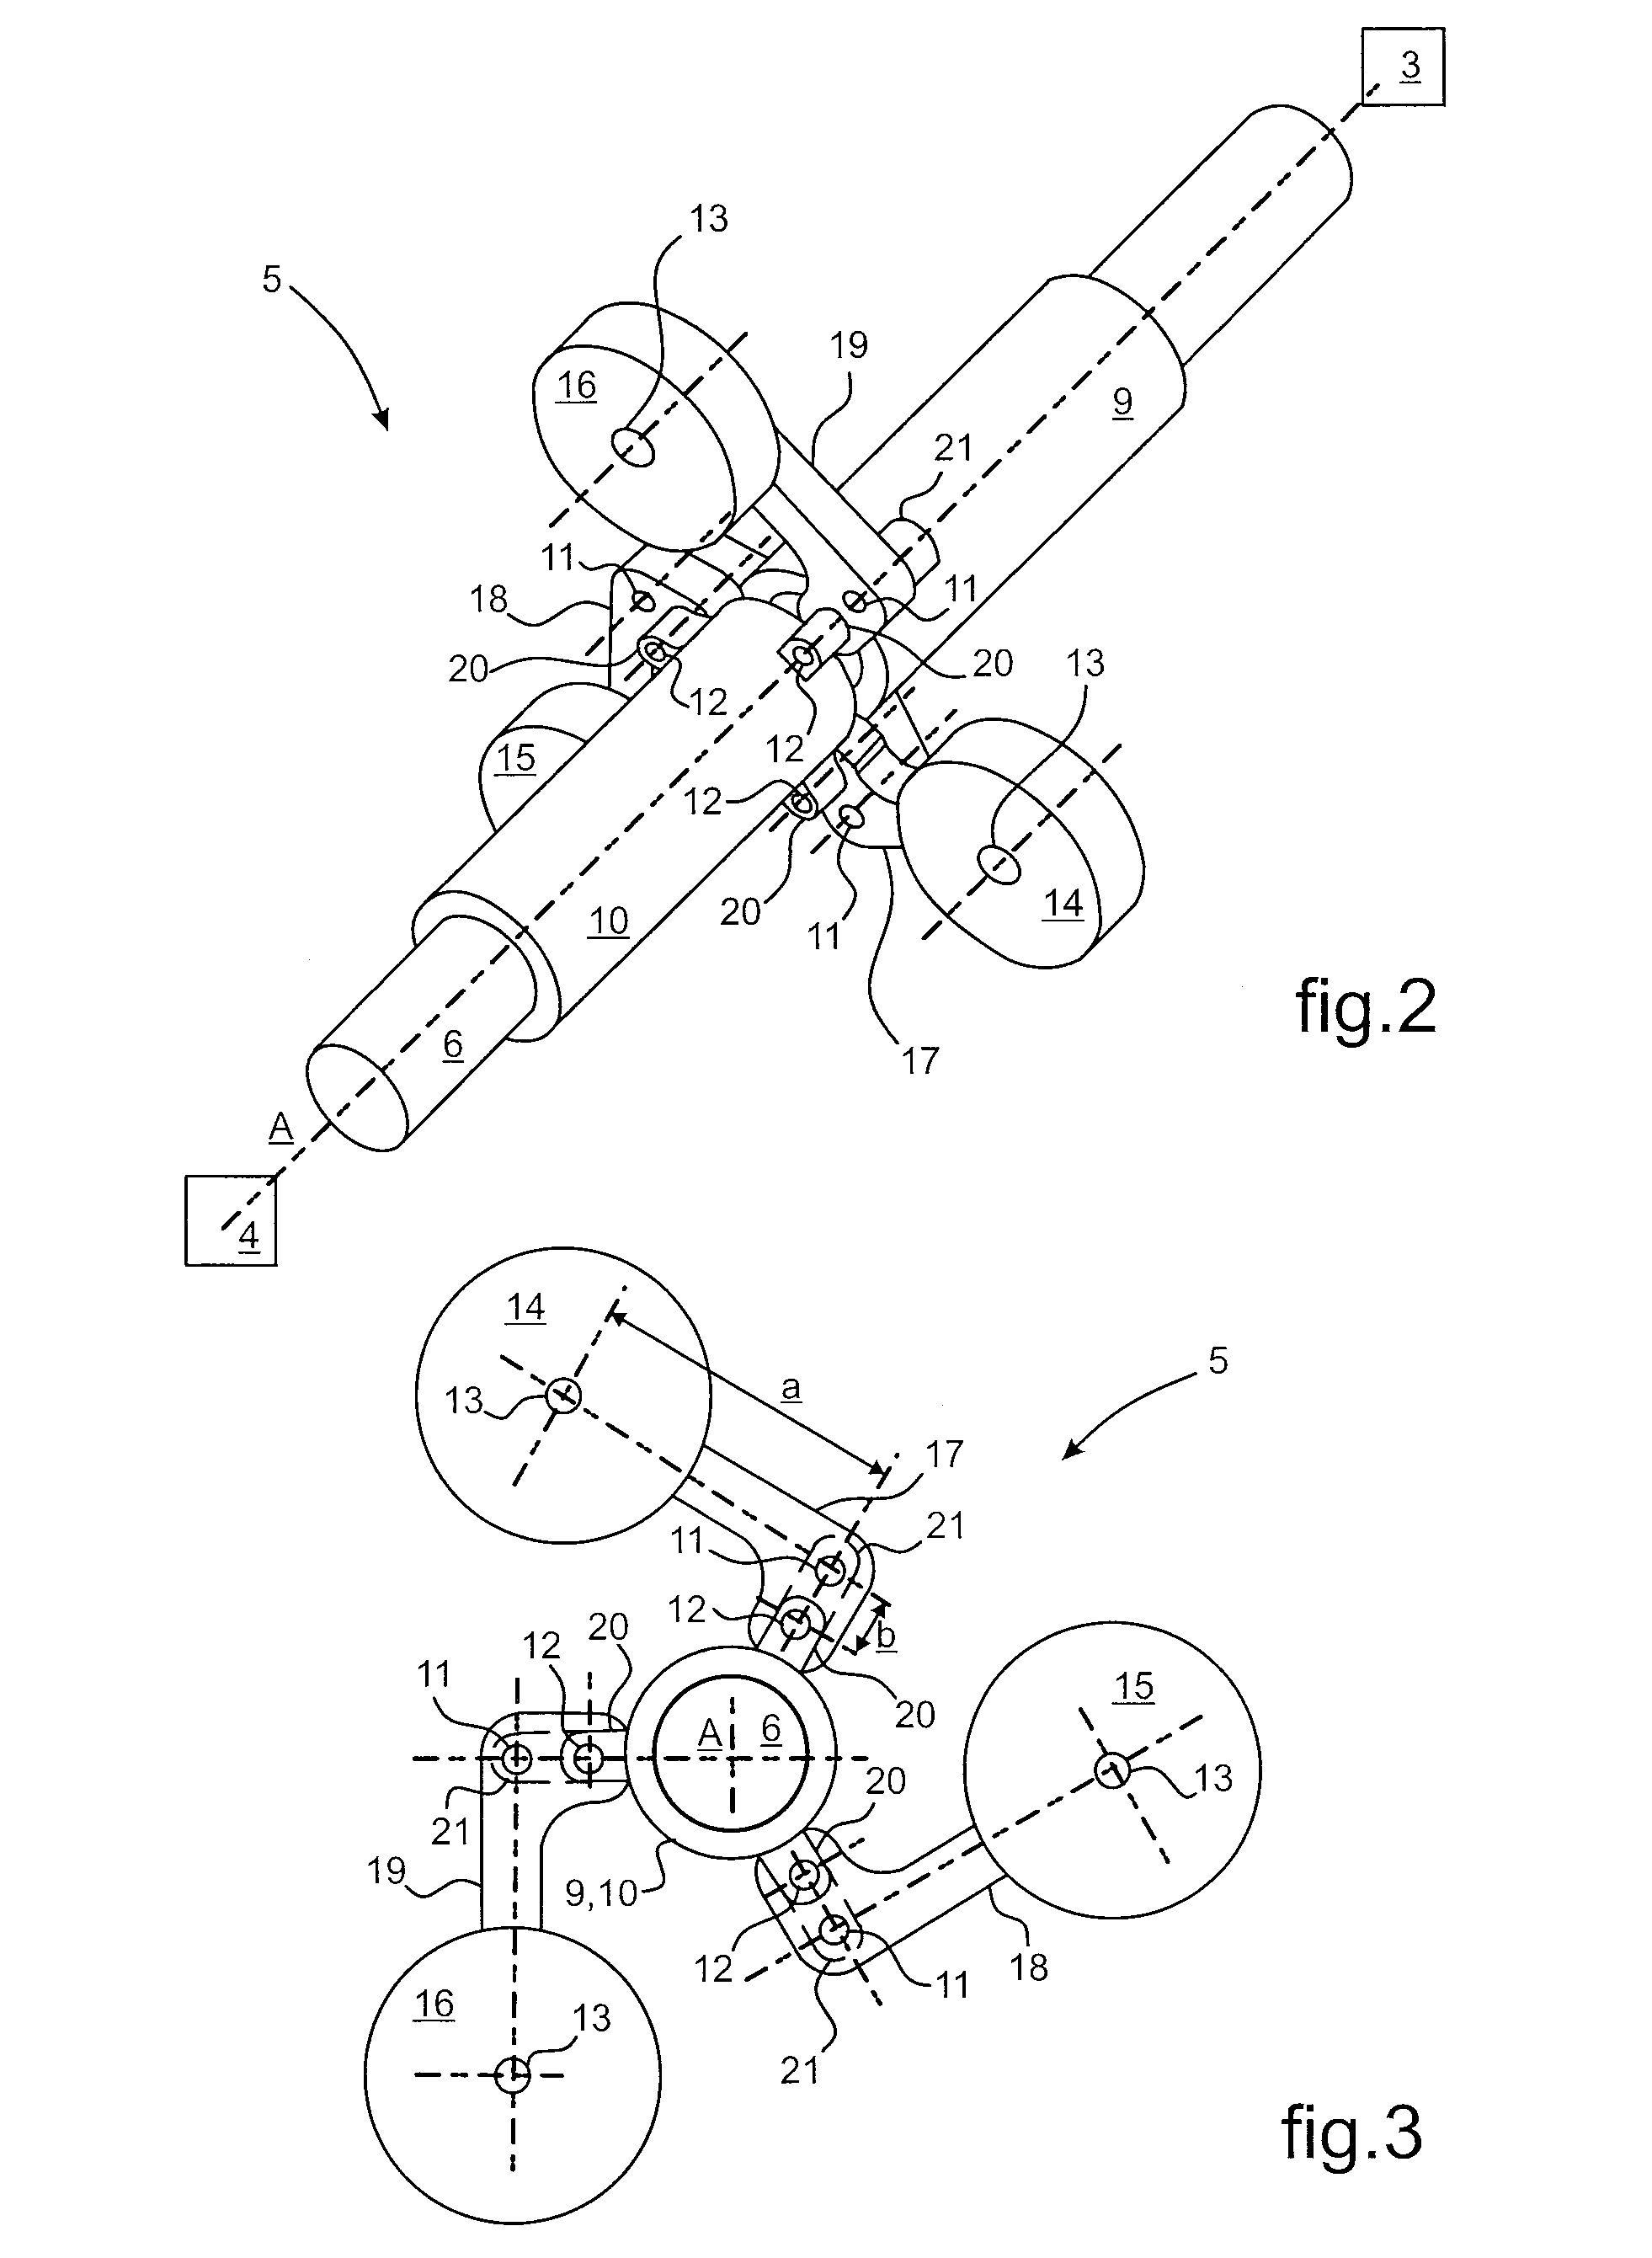 Mechanism for attenuating torque pulsations between an engine and a rotorcraft rotor driven by the engine